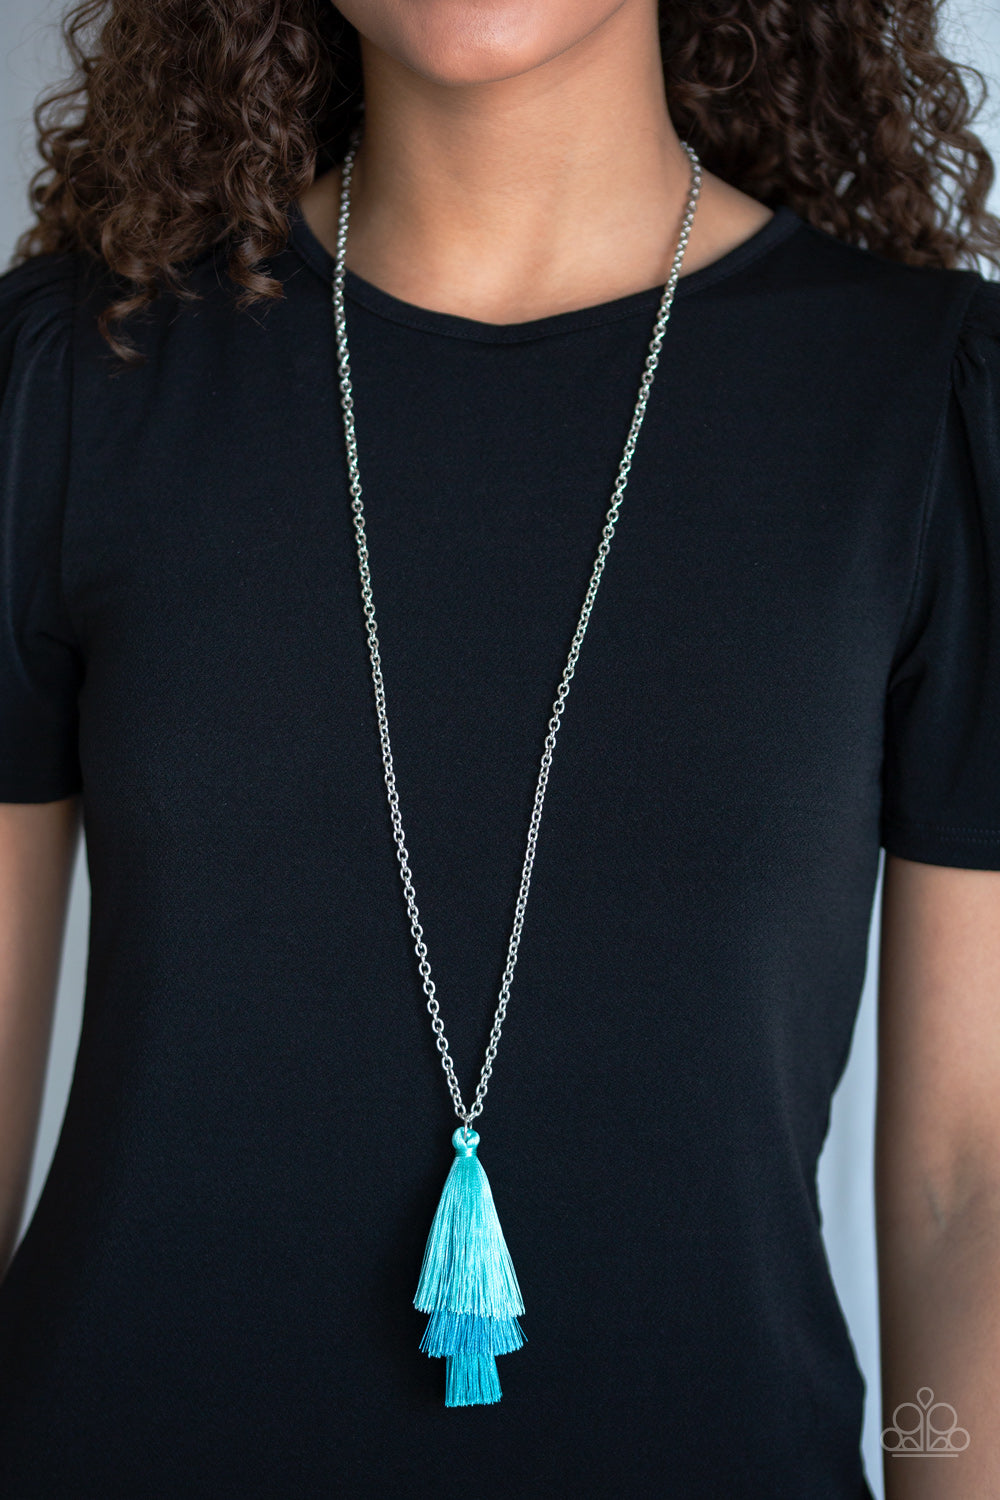 Triple The Tassel - Blue Necklace - TheMasterCollection